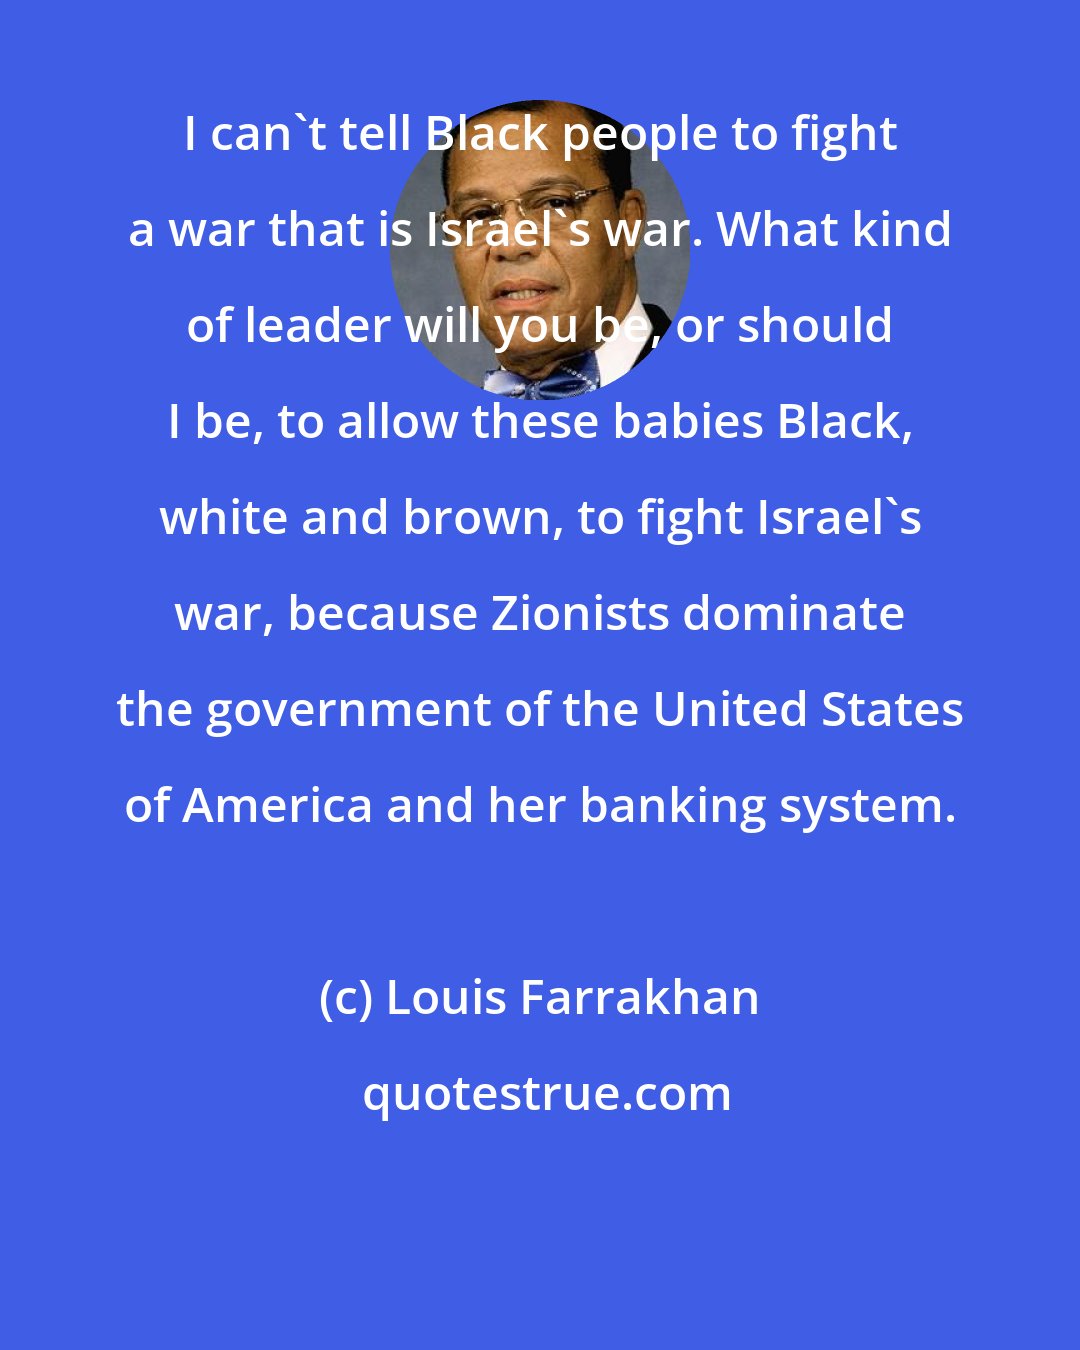 Louis Farrakhan: I can't tell Black people to fight a war that is Israel's war. What kind of leader will you be, or should I be, to allow these babies Black, white and brown, to fight Israel's war, because Zionists dominate the government of the United States of America and her banking system.